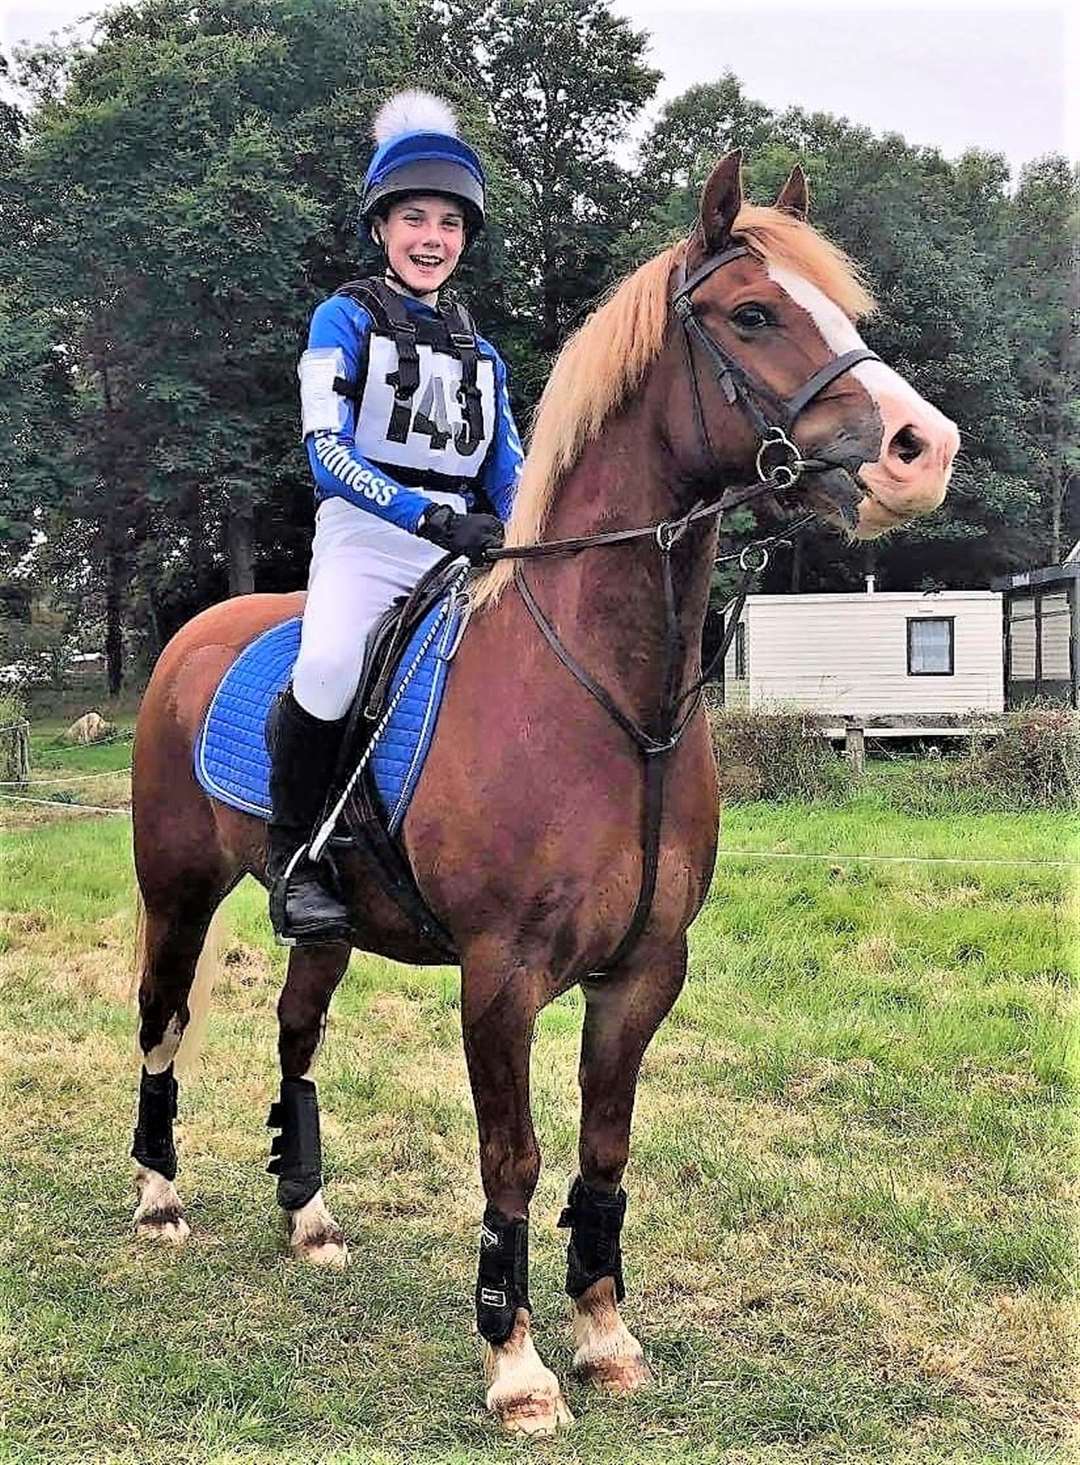 The face says it all. Liam Mackenzie looking very happy at the prospect of going cross country in the new Caithness Branch of the Pony Club colours.